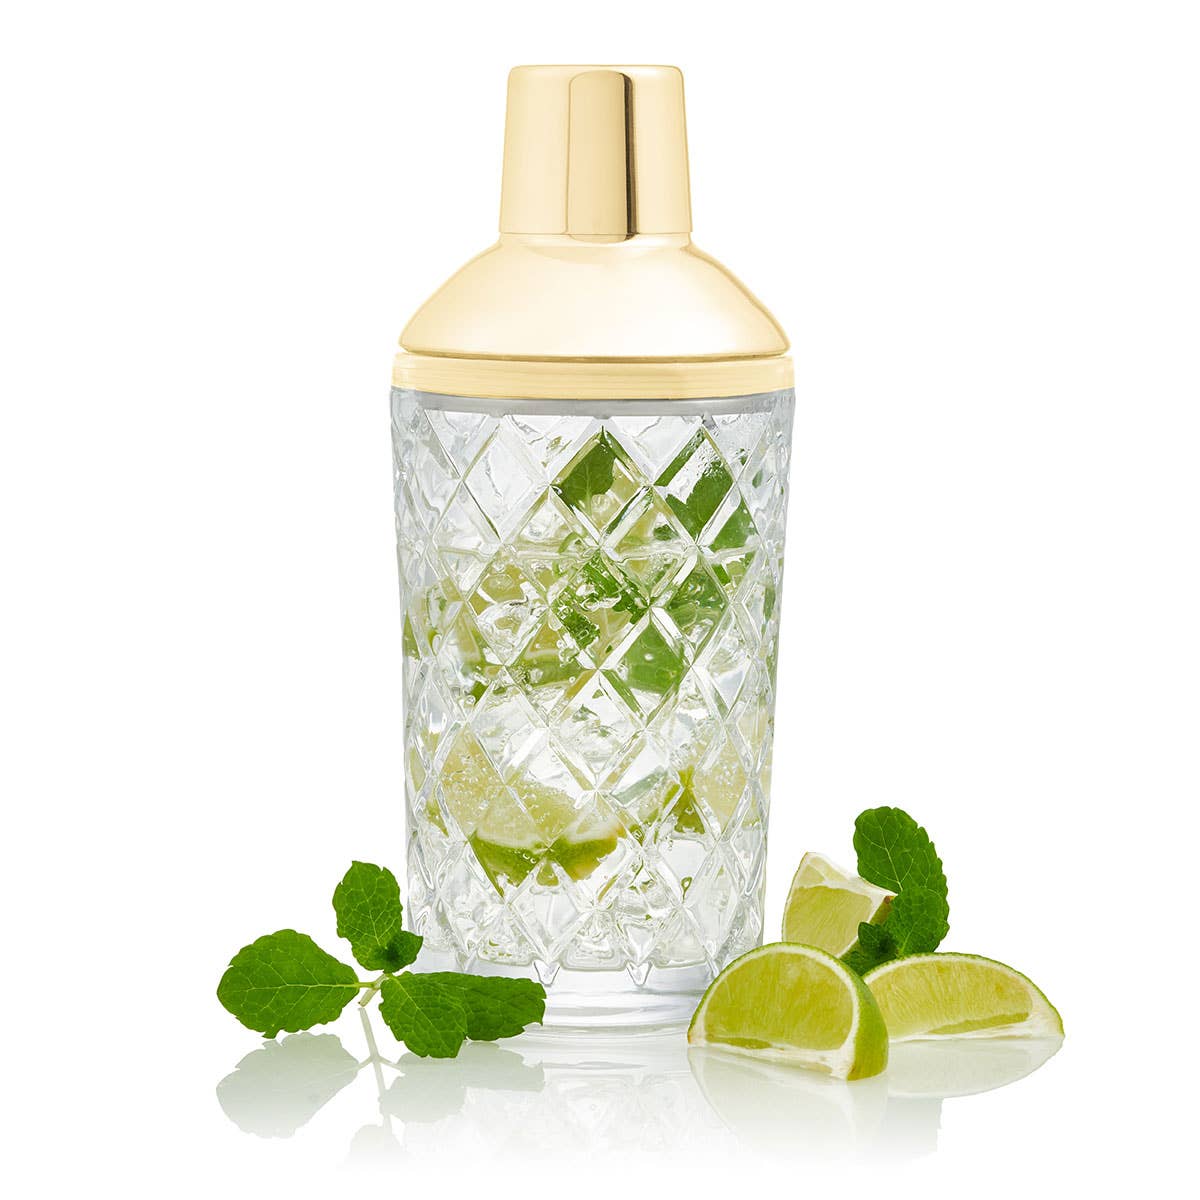 Large cut glass cocktail shaker with gold colour top by Uberstar filled with cocktail and limes and mint leaves